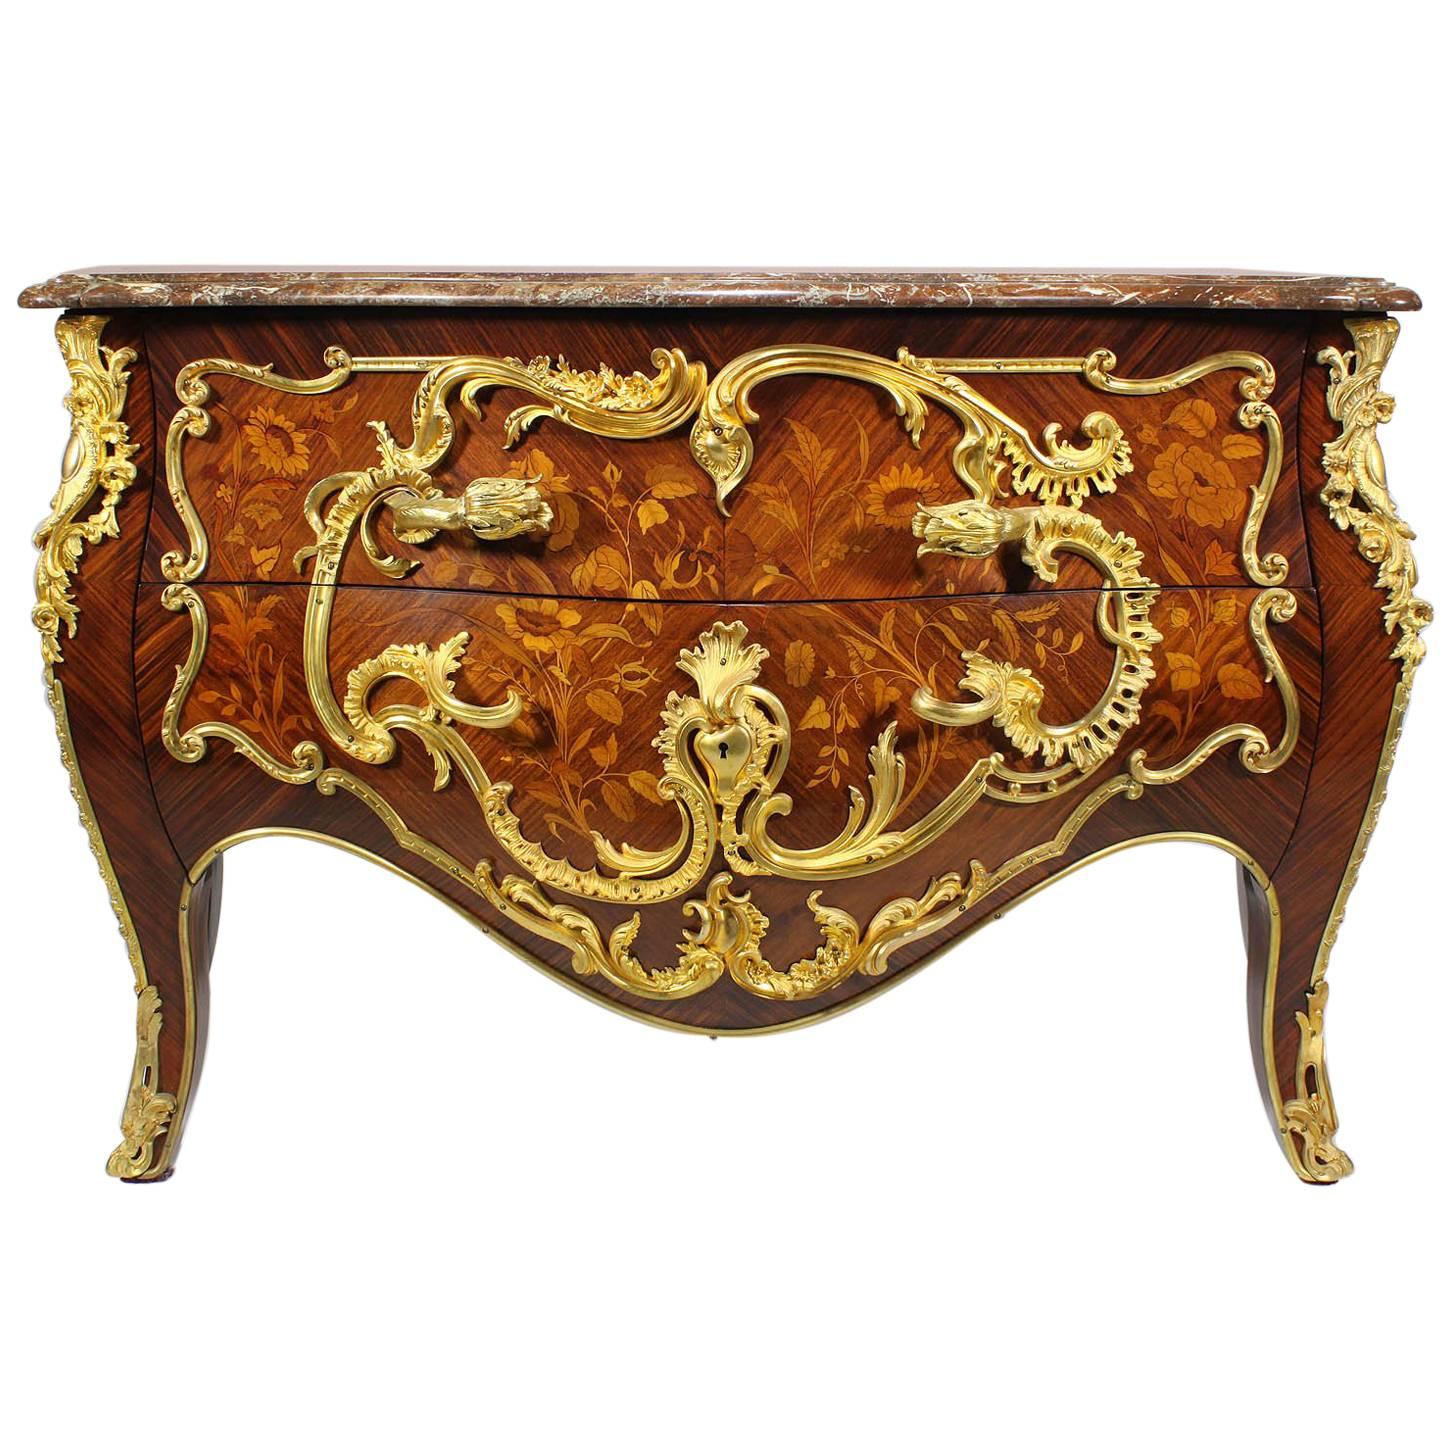 French, 19th Century, Louis XV Style Gilt Bronze-Mounted and Marquetry Commode